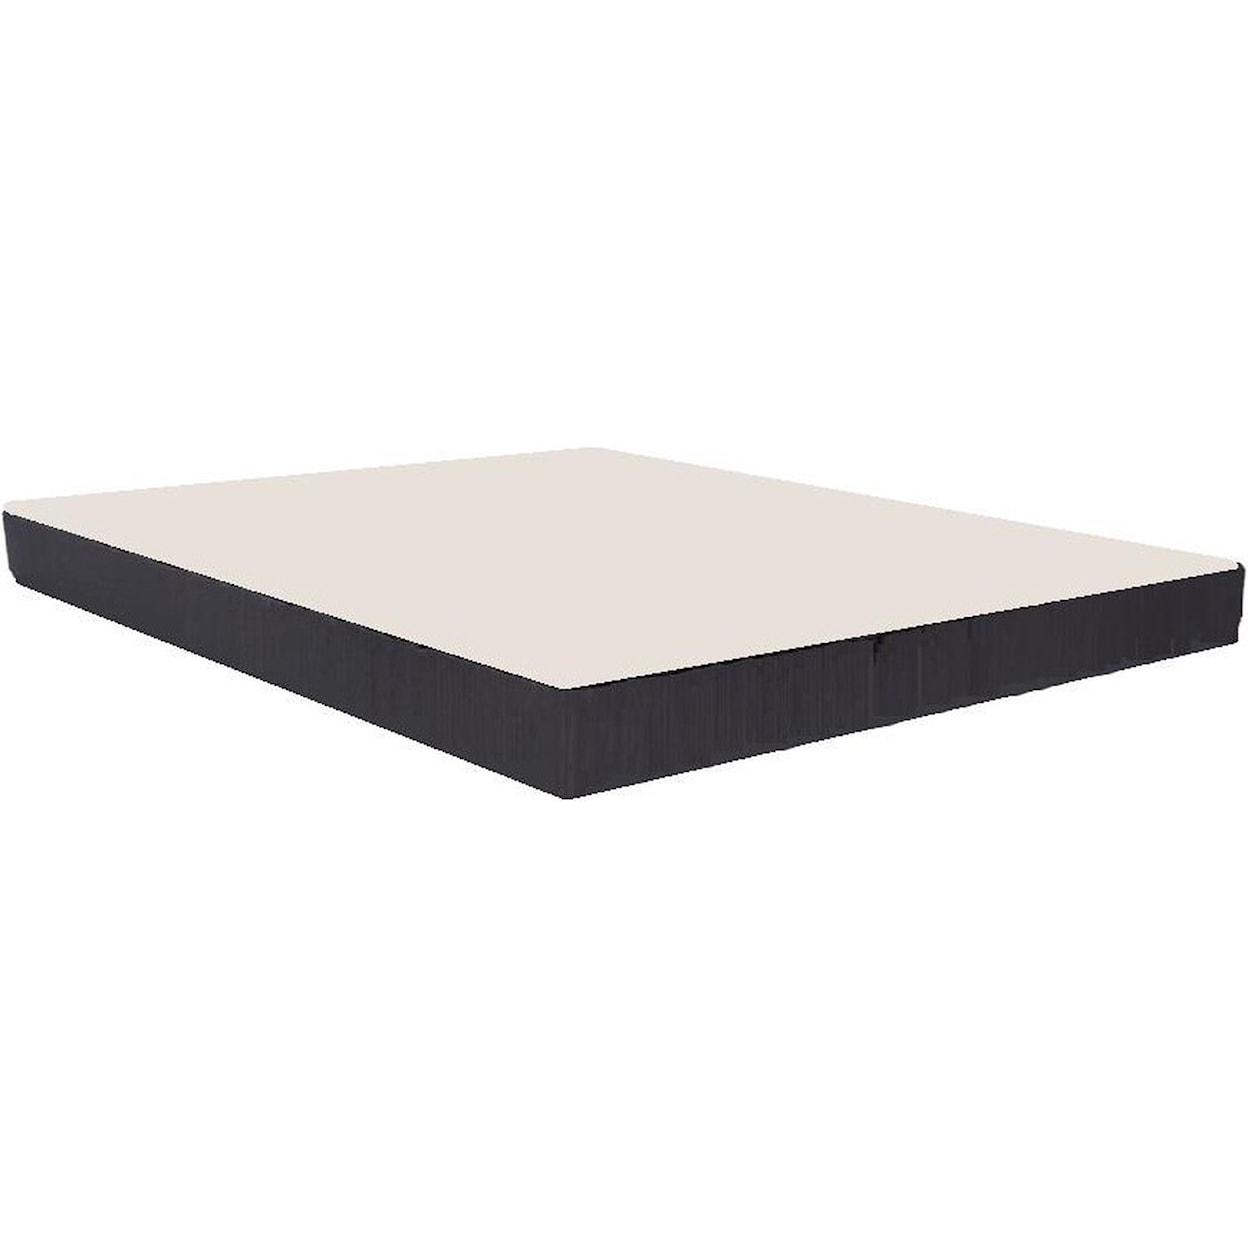 Southerland Bedding Co. Signature Foundations Full Low Profile Base 5" Height